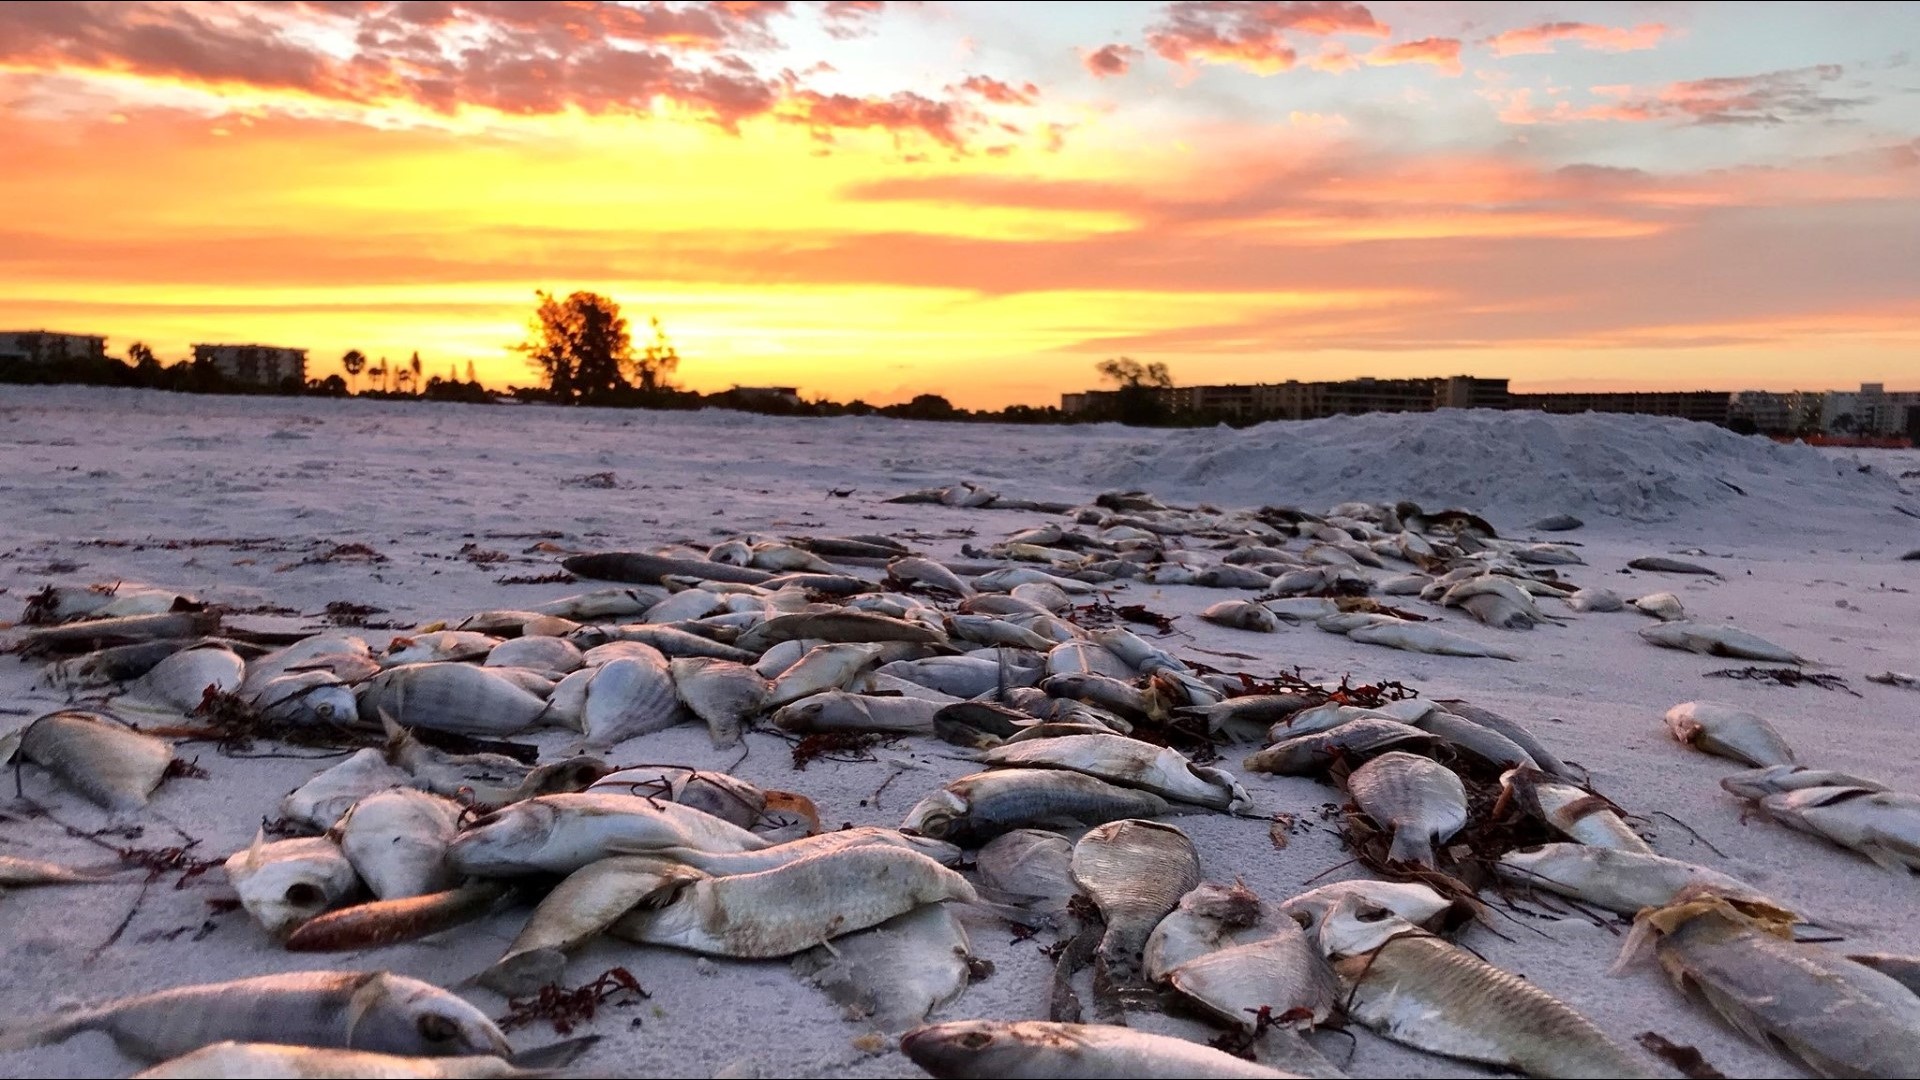 Thousands of dead fish, eels wash up on Siesta Key Beach as red tide